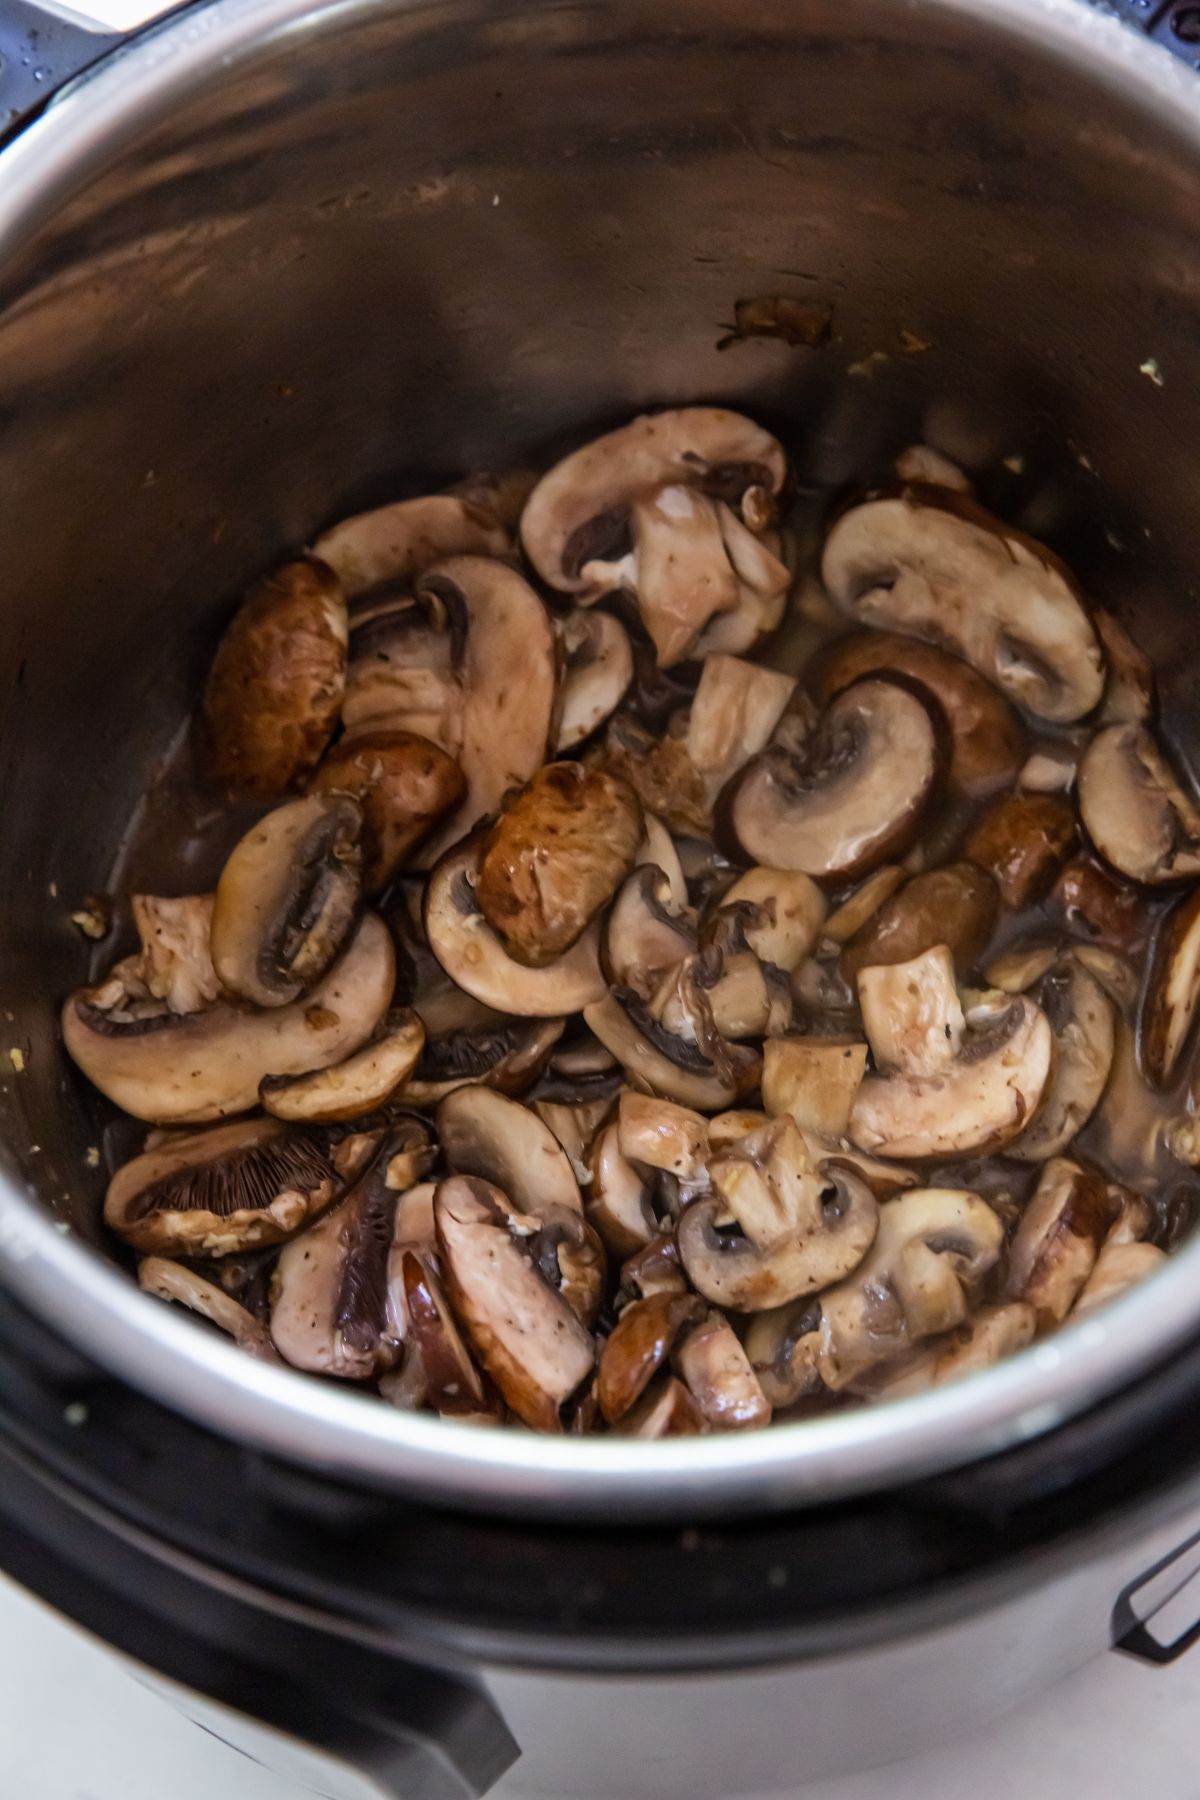 cooked mushrooms inside the instant pot with chicken broth inside